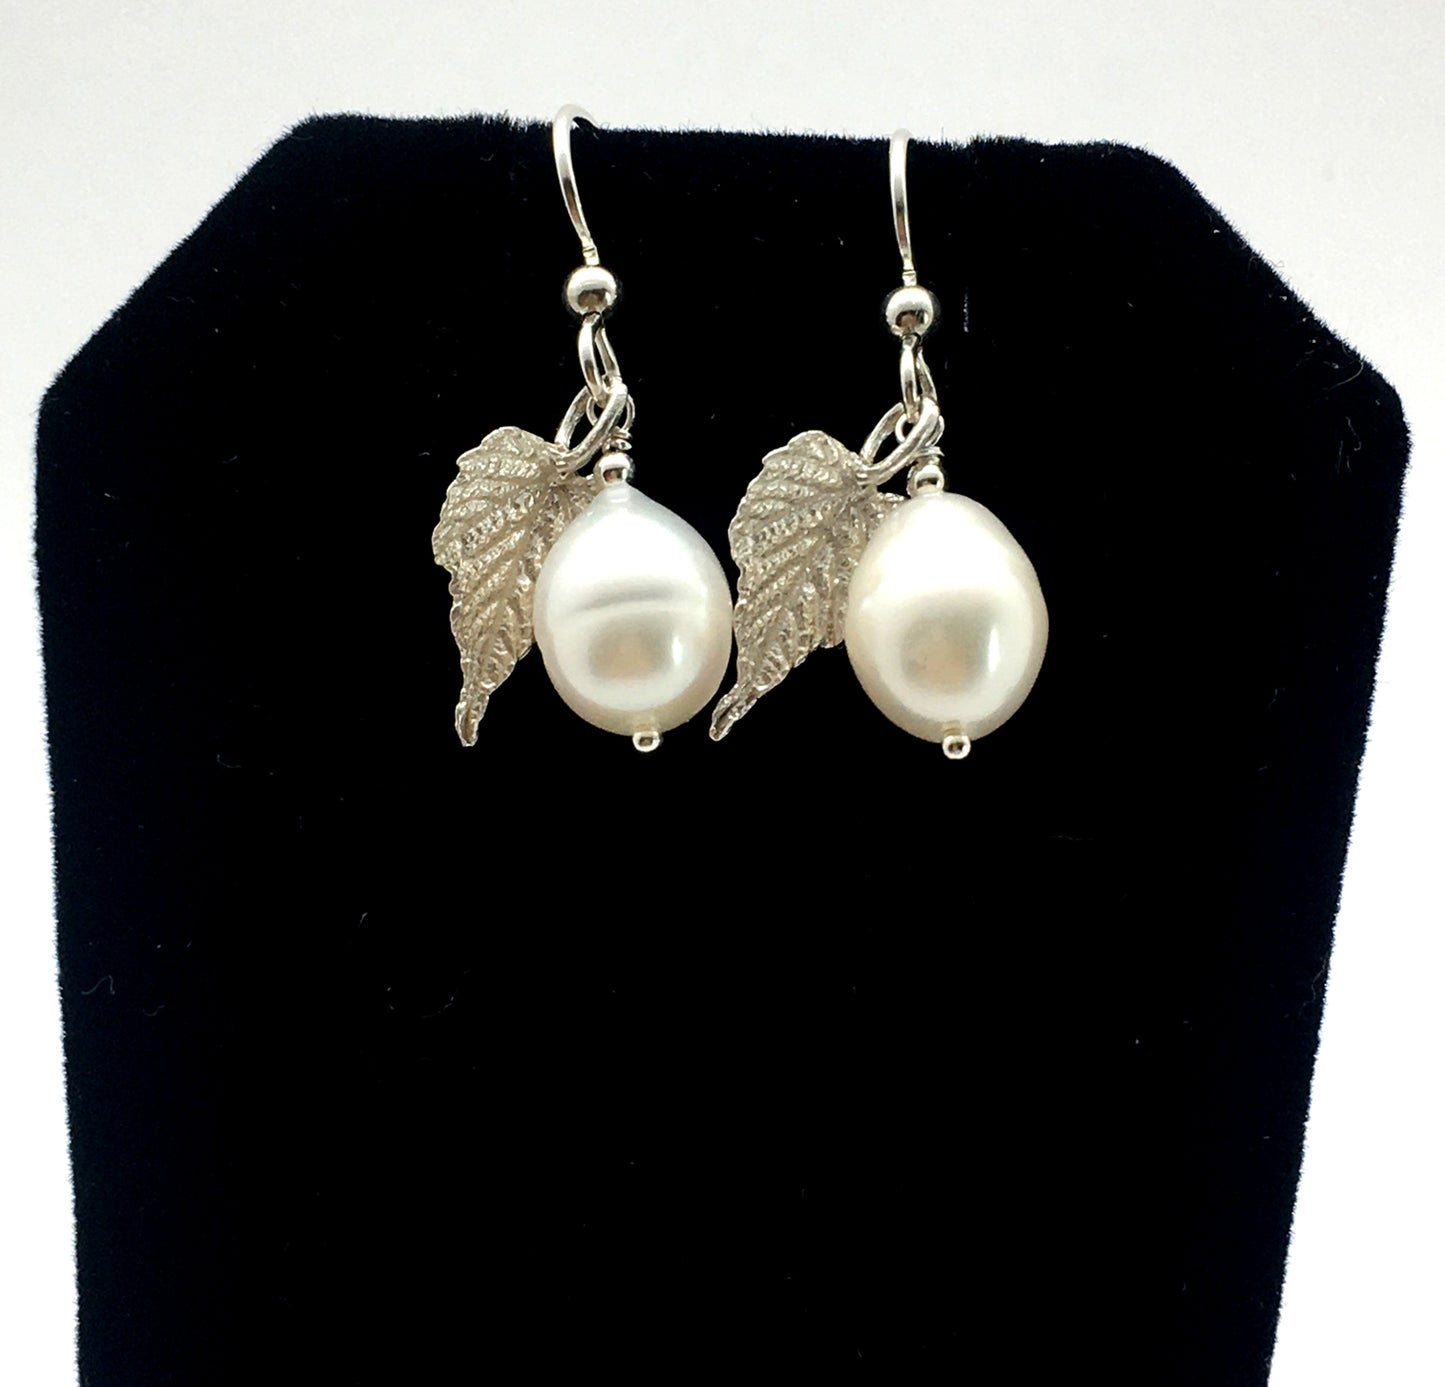 Pearl Earrings with Sterling Silver Grape Leaves